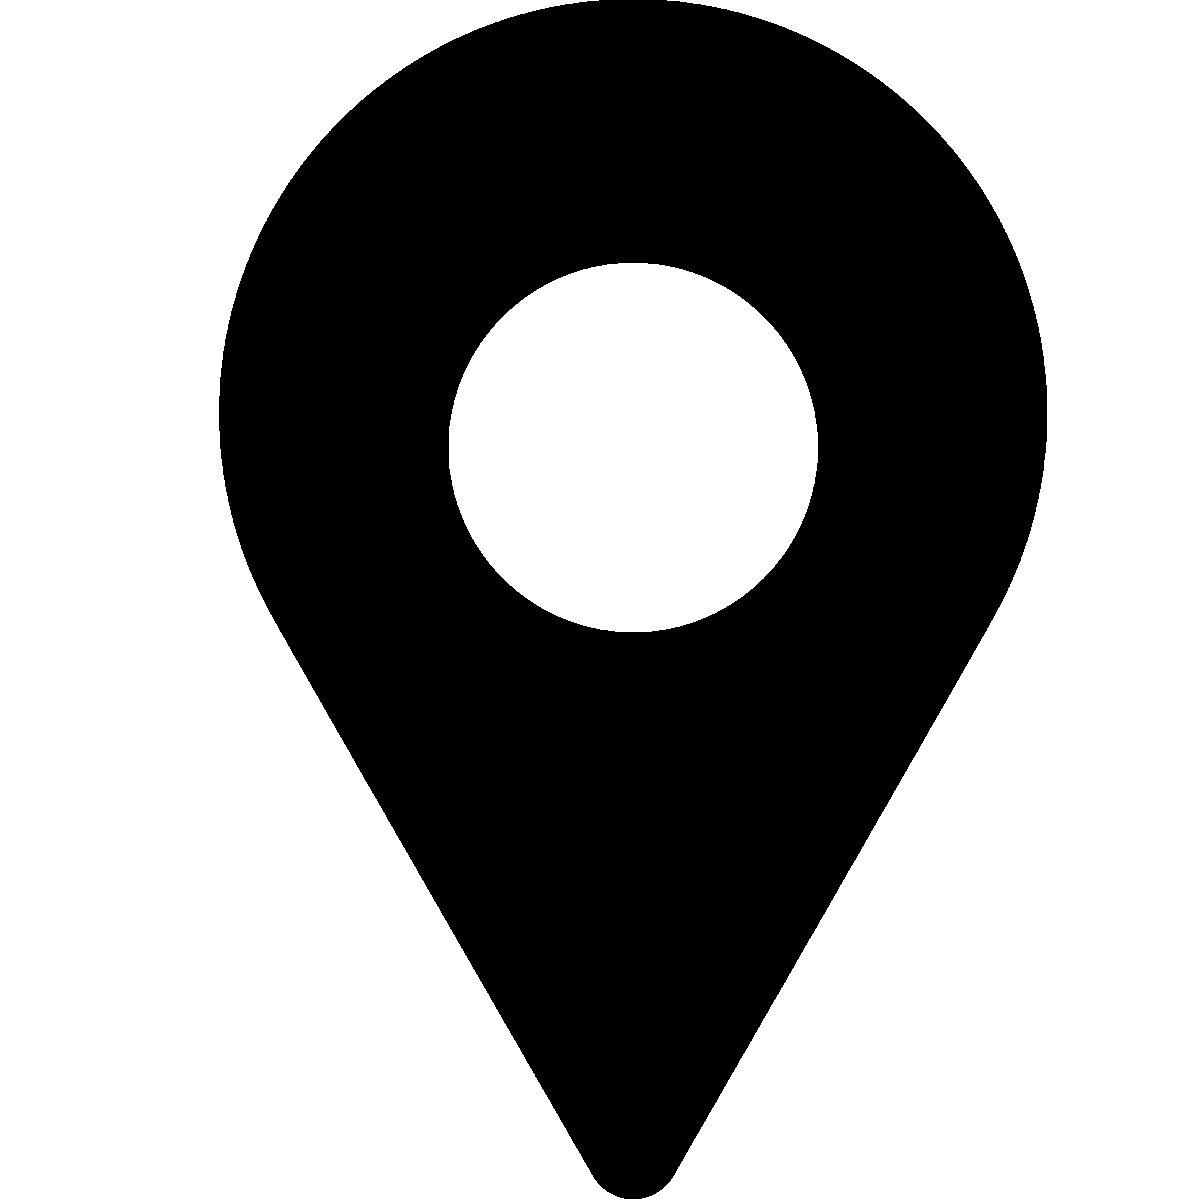 Location Icon Png Transparent Background Free Download 4245 Images